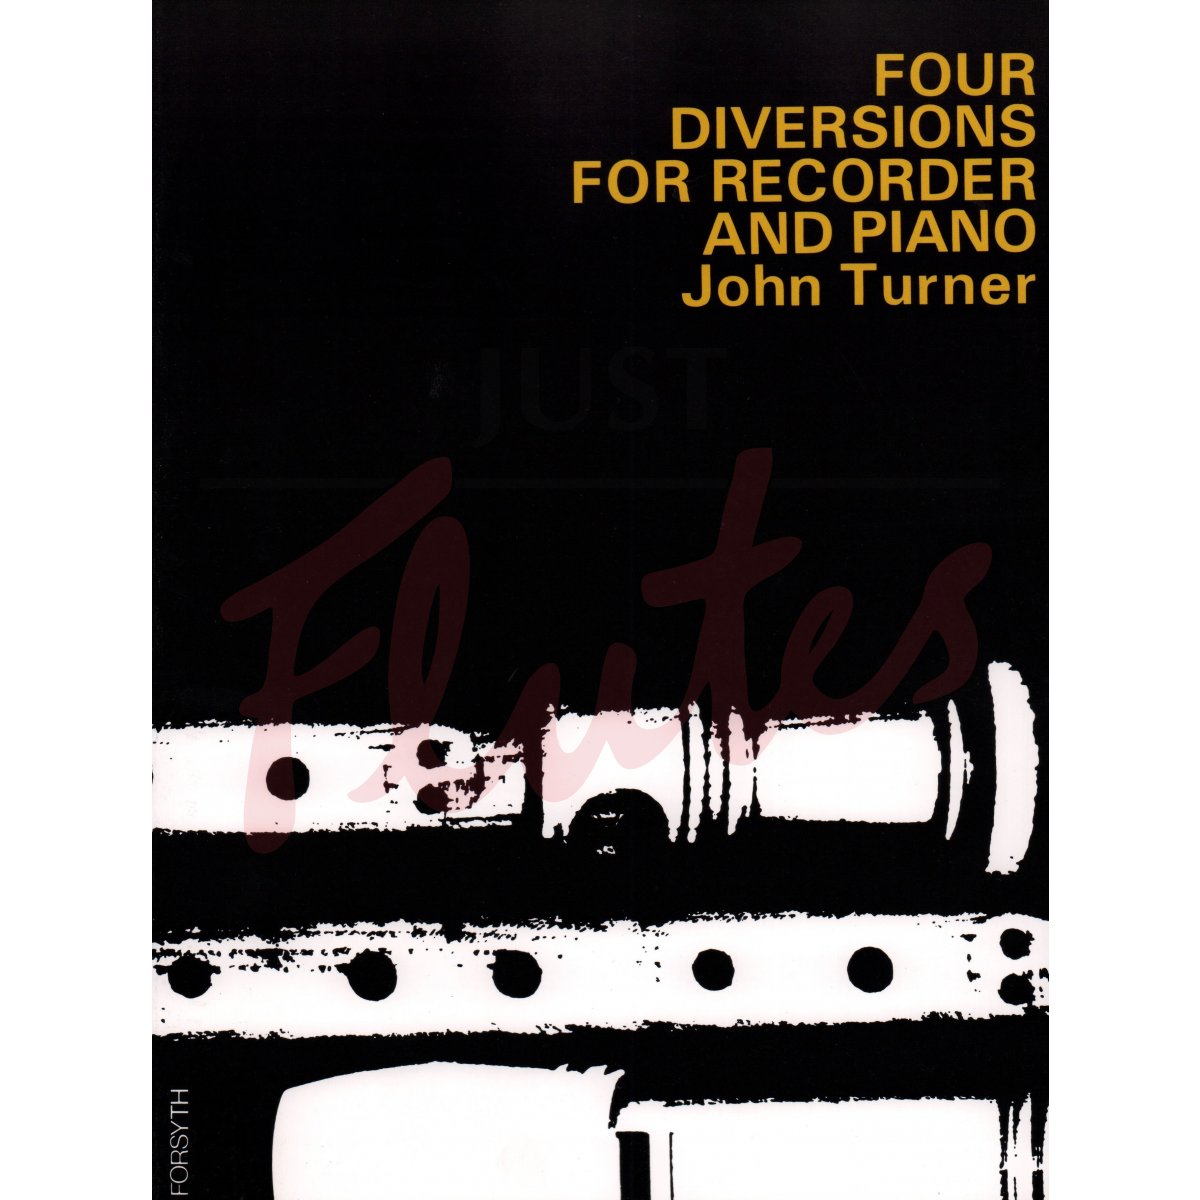 Four Diversions for Descant Recorder and Piano